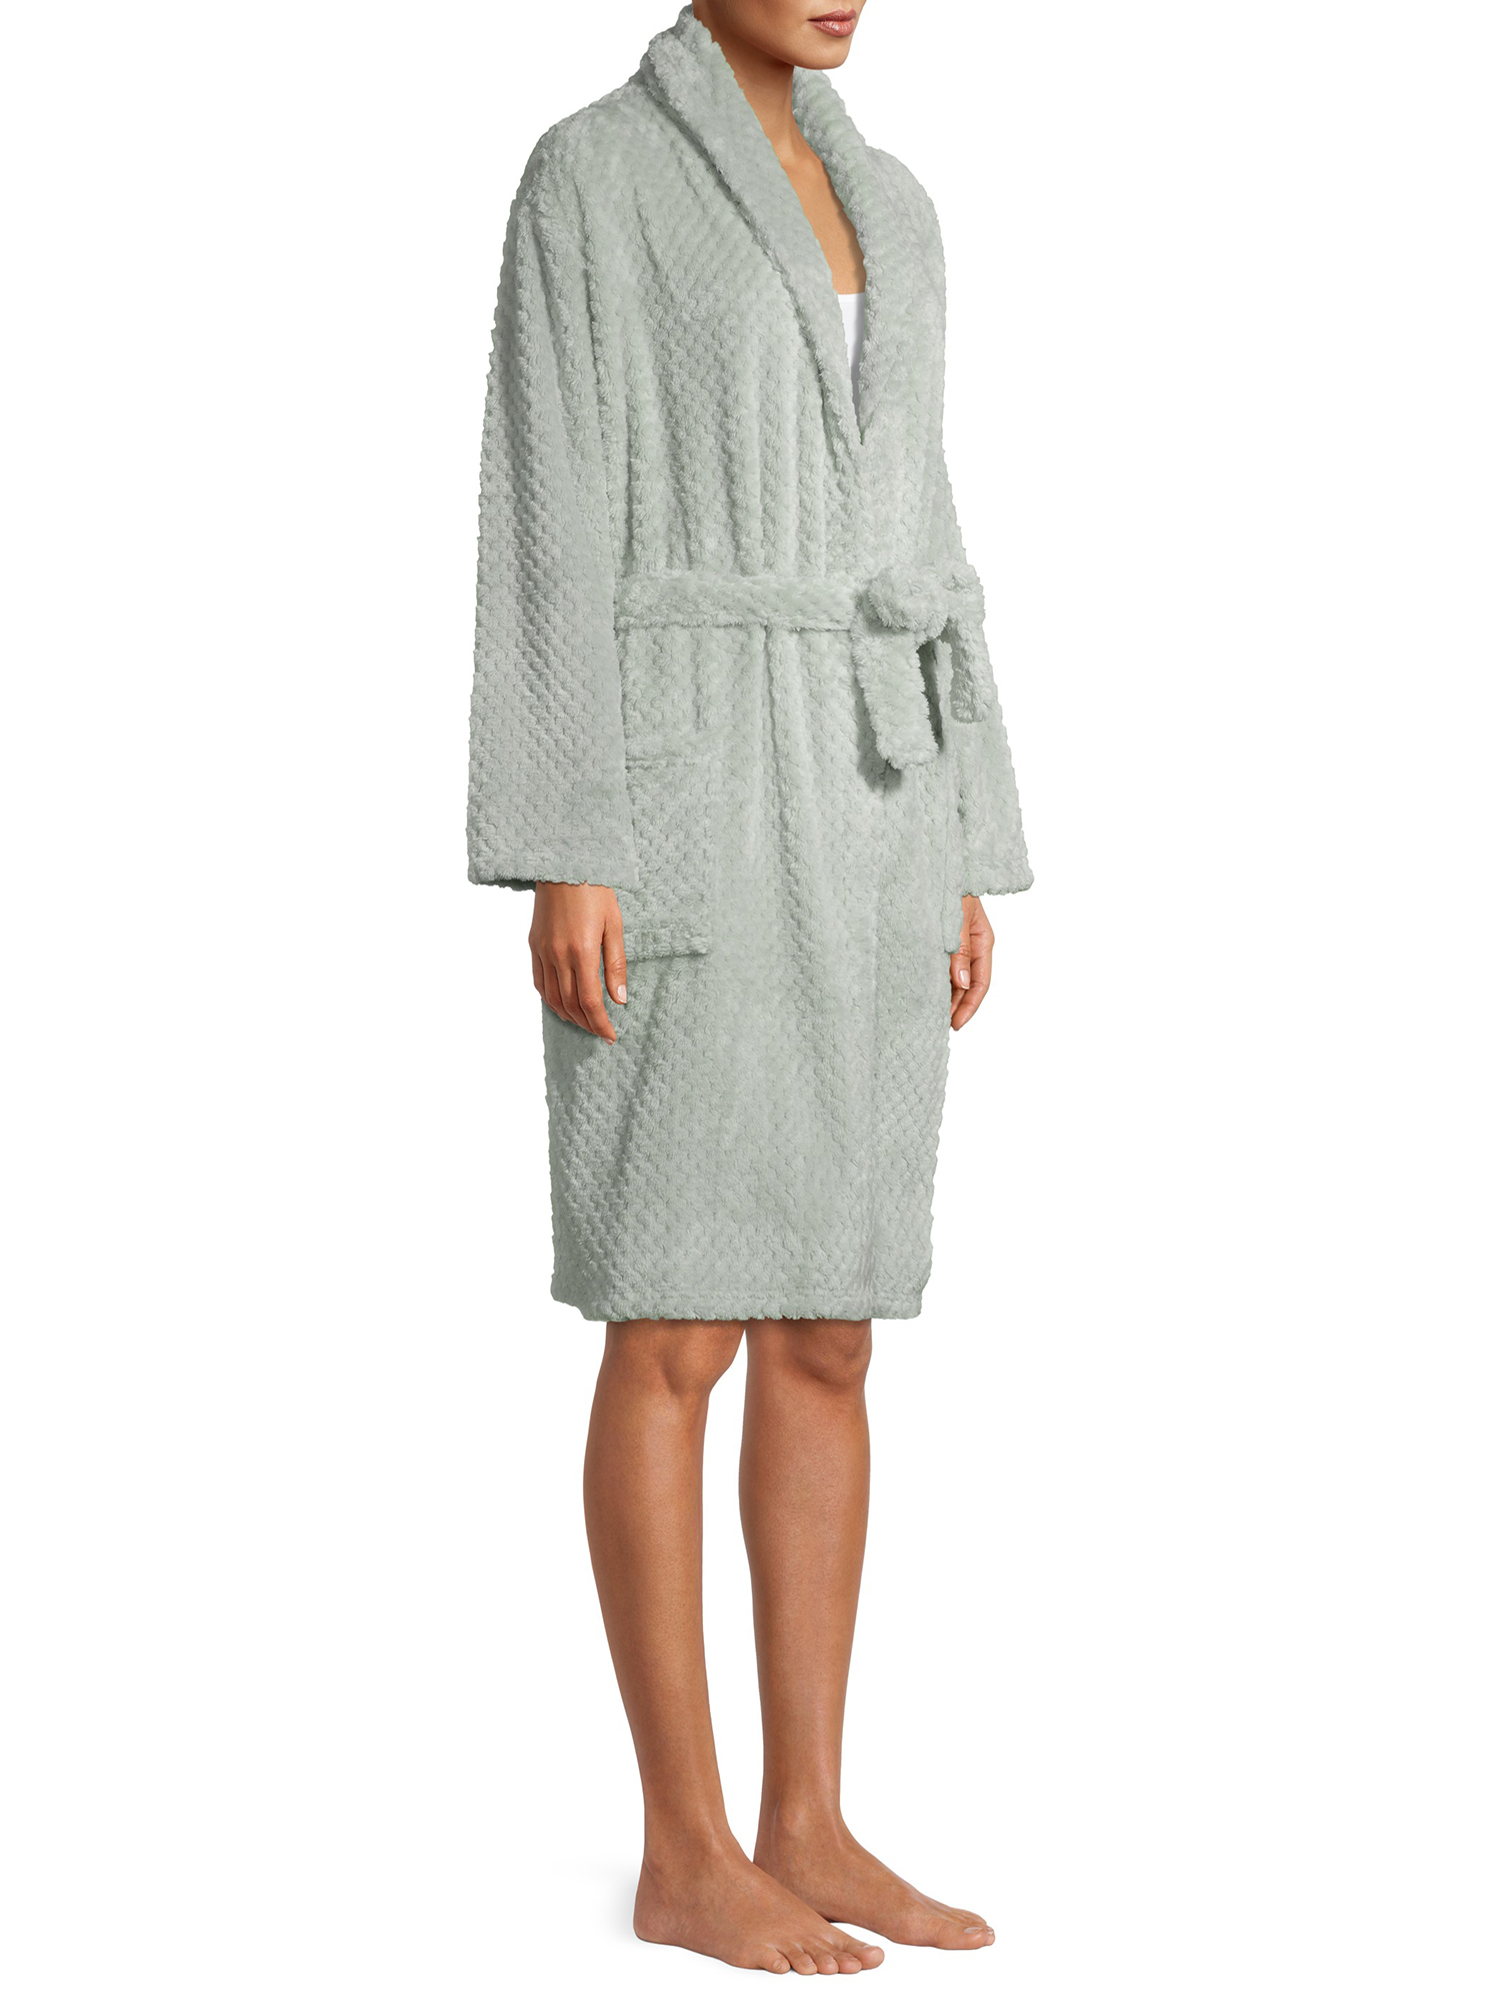 The Cozy Corner Club Durable Easy Care Textured Evening Robe (Women's), 1 Pack - image 3 of 7